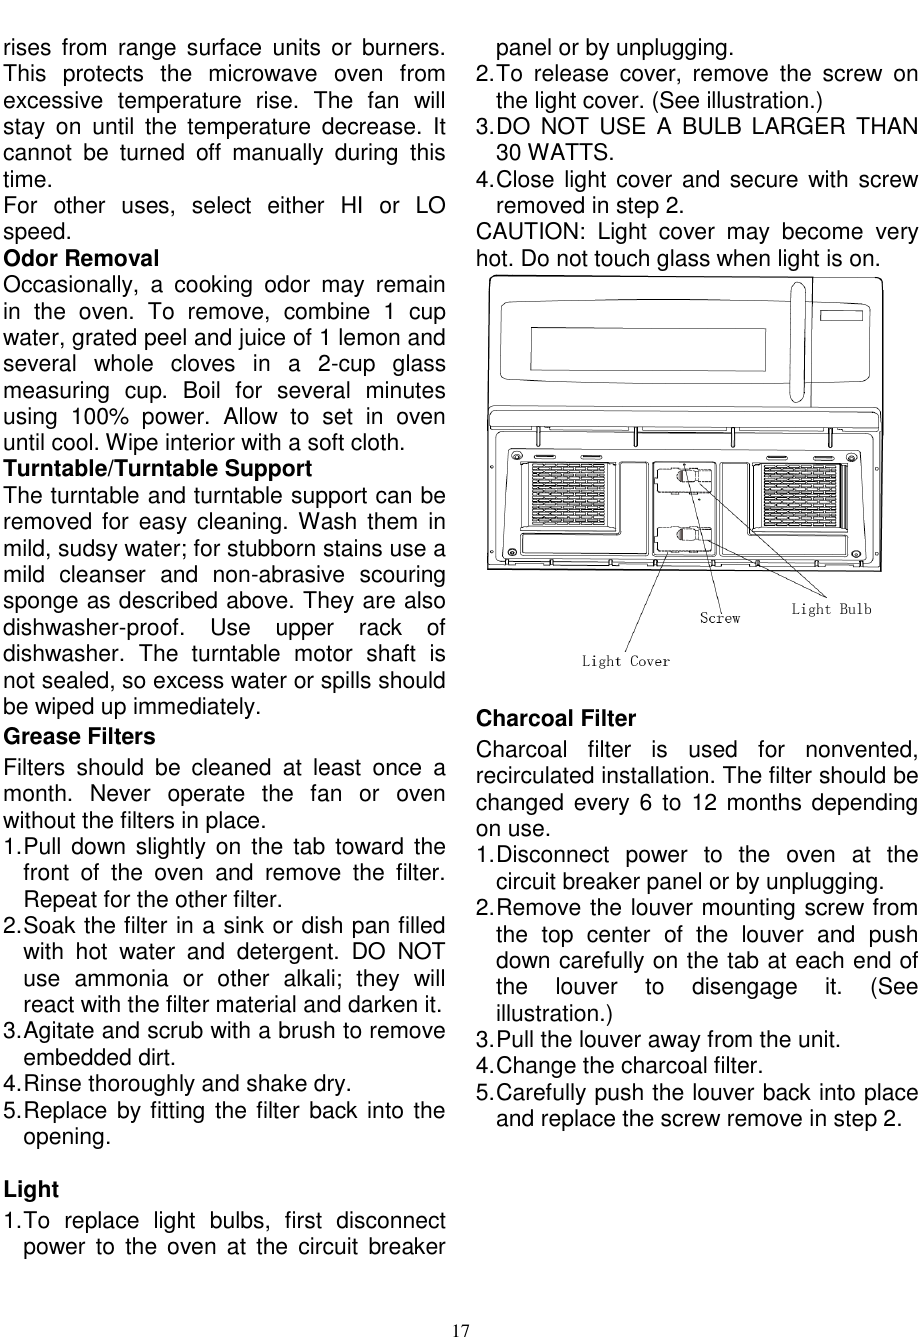  17  rises  from  range  surface  units  or  burners. This  protects  the  microwave  oven  from excessive  temperature  rise.  The  fan  will stay  on  until  the  temperature  decrease.  It cannot  be  turned  off  manually  during  this time. For  other  uses,  select  either  HI  or  LO speed. Odor Removal Occasionally,  a  cooking  odor  may  remain in  the  oven.  To  remove,  combine  1  cup water, grated peel and juice of 1 lemon and several  whole  cloves  in  a  2-cup  glass measuring  cup.  Boil  for  several  minutes using  100%  power.  Allow  to  set  in  oven until cool. Wipe interior with a soft cloth. Turntable/Turntable Support The turntable and turntable support can be removed for  easy  cleaning. Wash them  in mild, sudsy water; for stubborn stains use a mild  cleanser  and  non-abrasive  scouring sponge as described above. They are also dishwasher-proof.  Use  upper  rack  of dishwasher.  The  turntable  motor  shaft  is not sealed, so excess water or spills should be wiped up immediately. Grease Filters   Filters  should  be  cleaned  at  least  once  a month.  Never  operate  the  fan  or  oven without the filters in place. 1. Pull down slightly  on  the  tab  toward the front  of  the  oven  and  remove  the  filter. Repeat for the other filter. 2. Soak the filter in a sink or dish pan filled with  hot  water  and  detergent.  DO  NOT use  ammonia  or  other  alkali;  they  will react with the filter material and darken it. 3. Agitate and scrub with a brush to remove embedded dirt. 4. Rinse thoroughly and shake dry. 5. Replace by fitting the filter back into the opening.  Light 1. To  replace  light  bulbs,  first  disconnect power to  the  oven  at the circuit  breaker panel or by unplugging. 2. To  release  cover,  remove  the  screw  on the light cover. (See illustration.)       3. DO  NOT  USE  A  BULB  LARGER  THAN 30 WATTS. 4. Close light  cover and  secure with screw removed in step 2. CAUTION:  Light  cover  may  become  very hot. Do not touch glass when light is on.   Charcoal Filter Charcoal  filter  is  used  for  nonvented, recirculated installation. The filter should be changed every 6  to  12 months  depending on use. 1. Disconnect  power  to  the  oven  at  the circuit breaker panel or by unplugging. 2. Remove the louver mounting screw from the  top  center  of  the  louver  and  push down carefully on the tab at each end of the  louver  to  disengage  it.  (See illustration.) 3. Pull the louver away from the unit. 4. Change the charcoal filter. 5. Carefully push the louver back into place and replace the screw remove in step 2. 